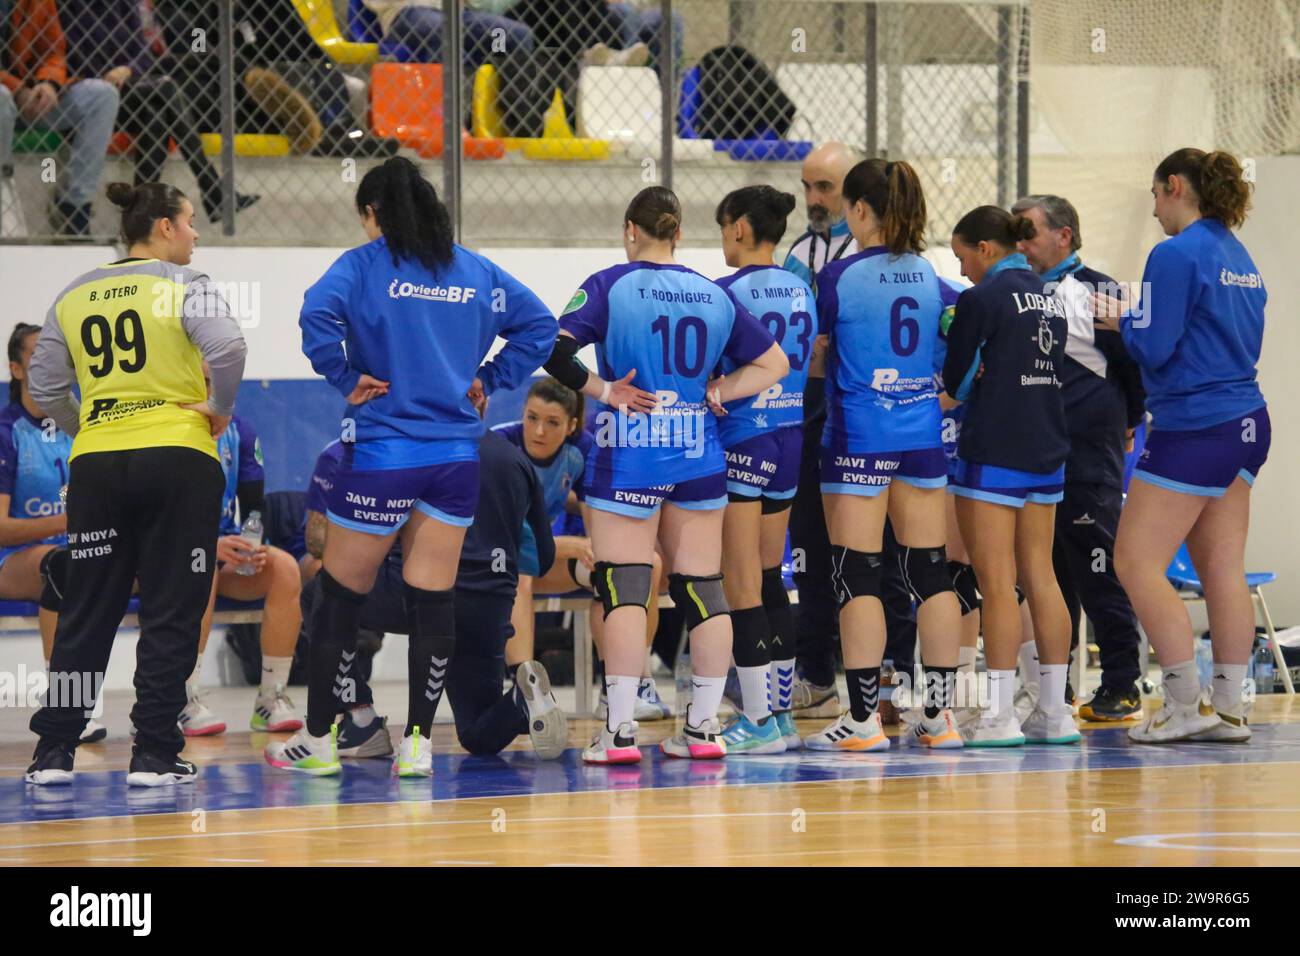 Oviedo, Spain, December 29, 2023: Lobas Global Atac Oviedo players receive instructions in a timeout during the 13th Matchday of the Liga Guerreras Iberdrola between Lobas Global Atac Oviedo and KH-7 BM. Granollers, on December 29, 2023, at the Florida Arena Municipal Sports Center, in Oviedo, Spain. Credit: Alberto Brevers / Alamy Live News. Stock Photo